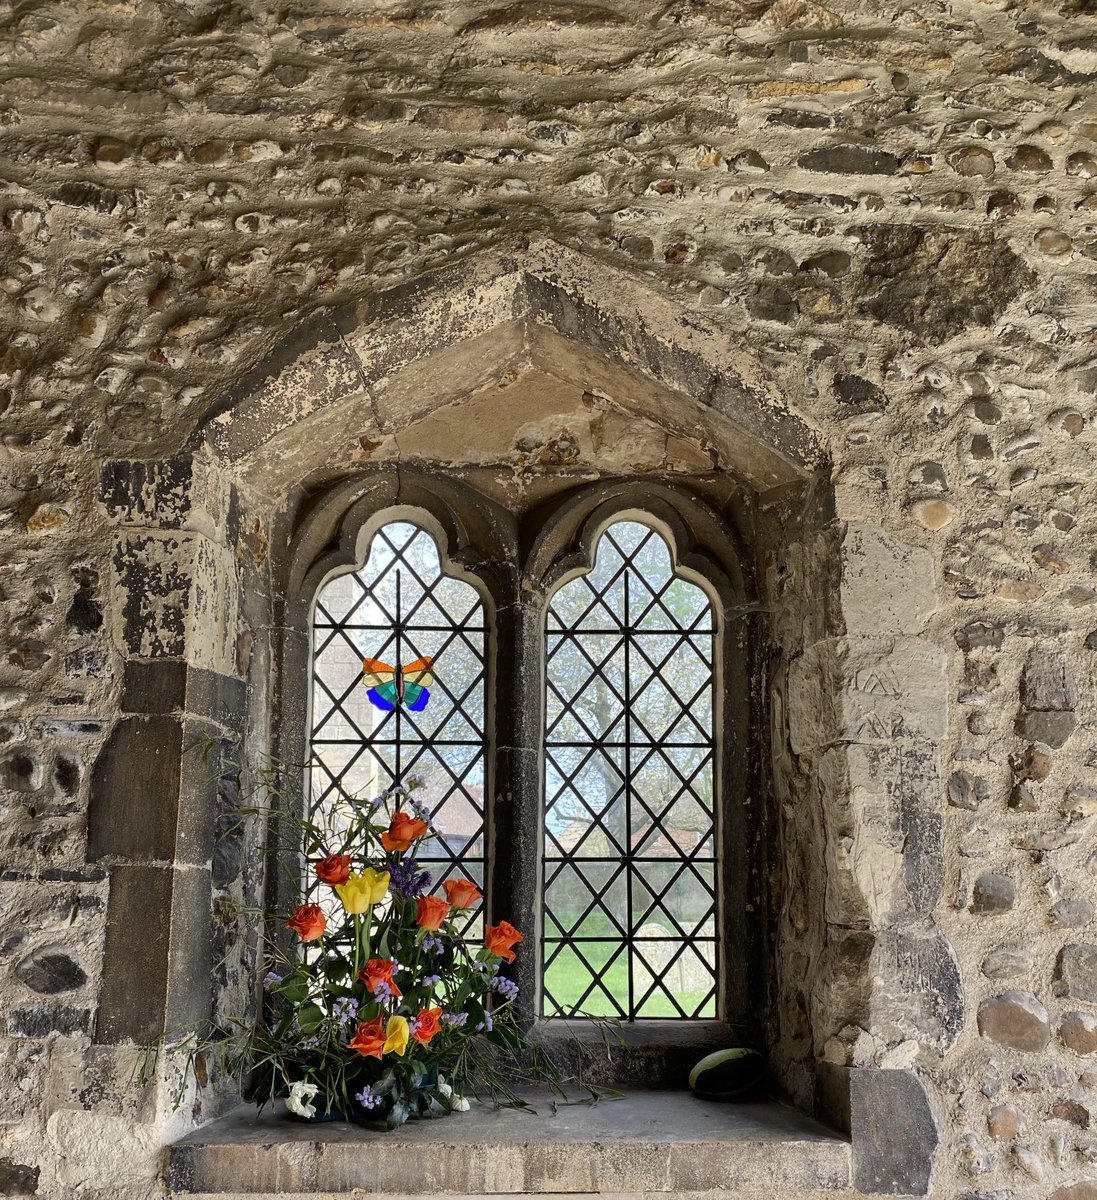 “Just think happy thoughts and you’ll fly.” J.M. Barrie’s, Peter Pan Wishing you a happy Thursday everyone 🙏 📷From Fenstanton church, Cambridgeshire